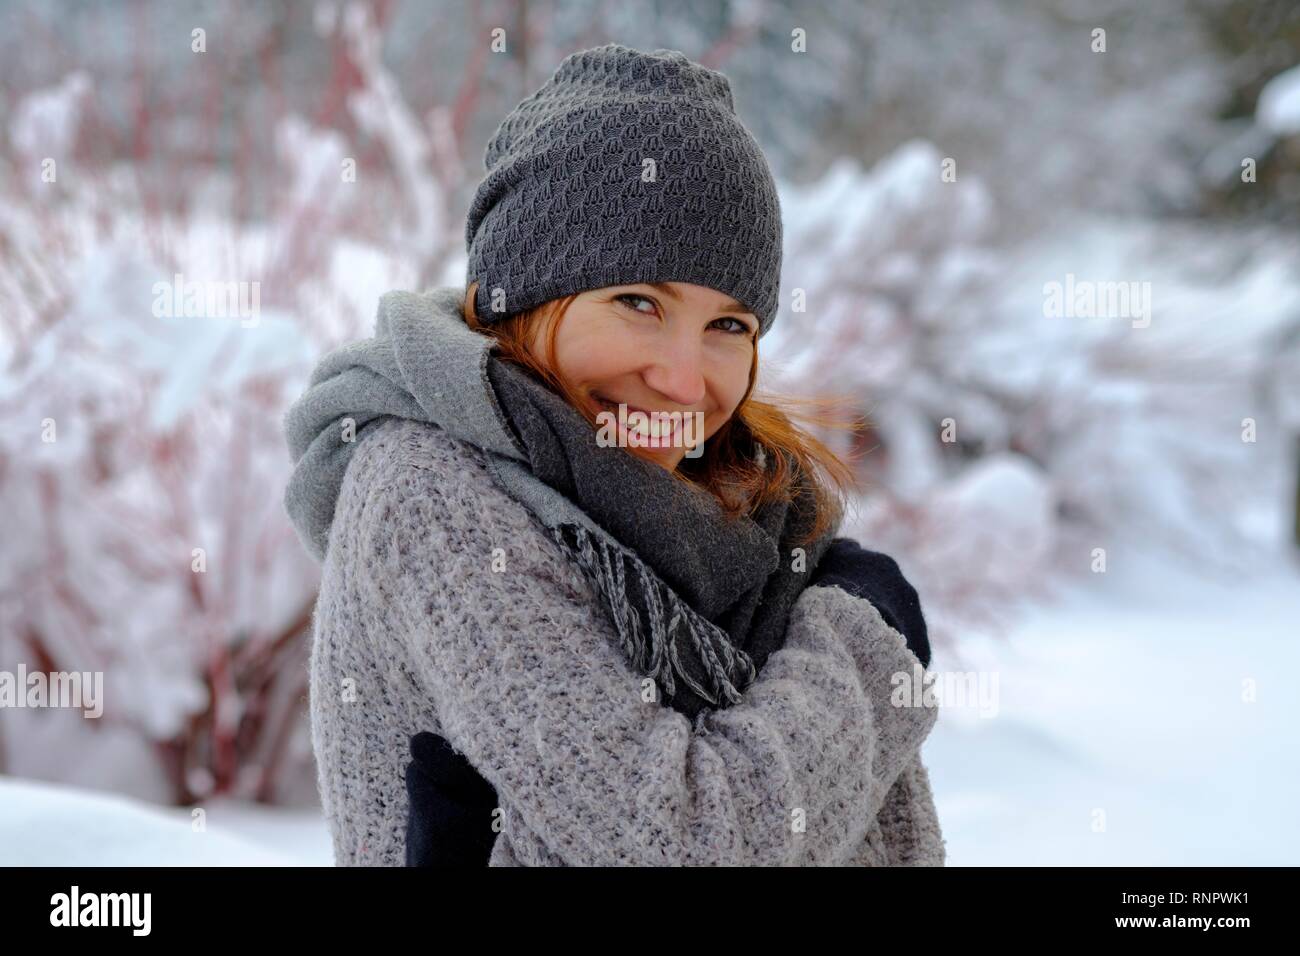 Girl with cap and scarf in winter in the snow, Upper Bavaria, Bavaria, Germany Stock Photo